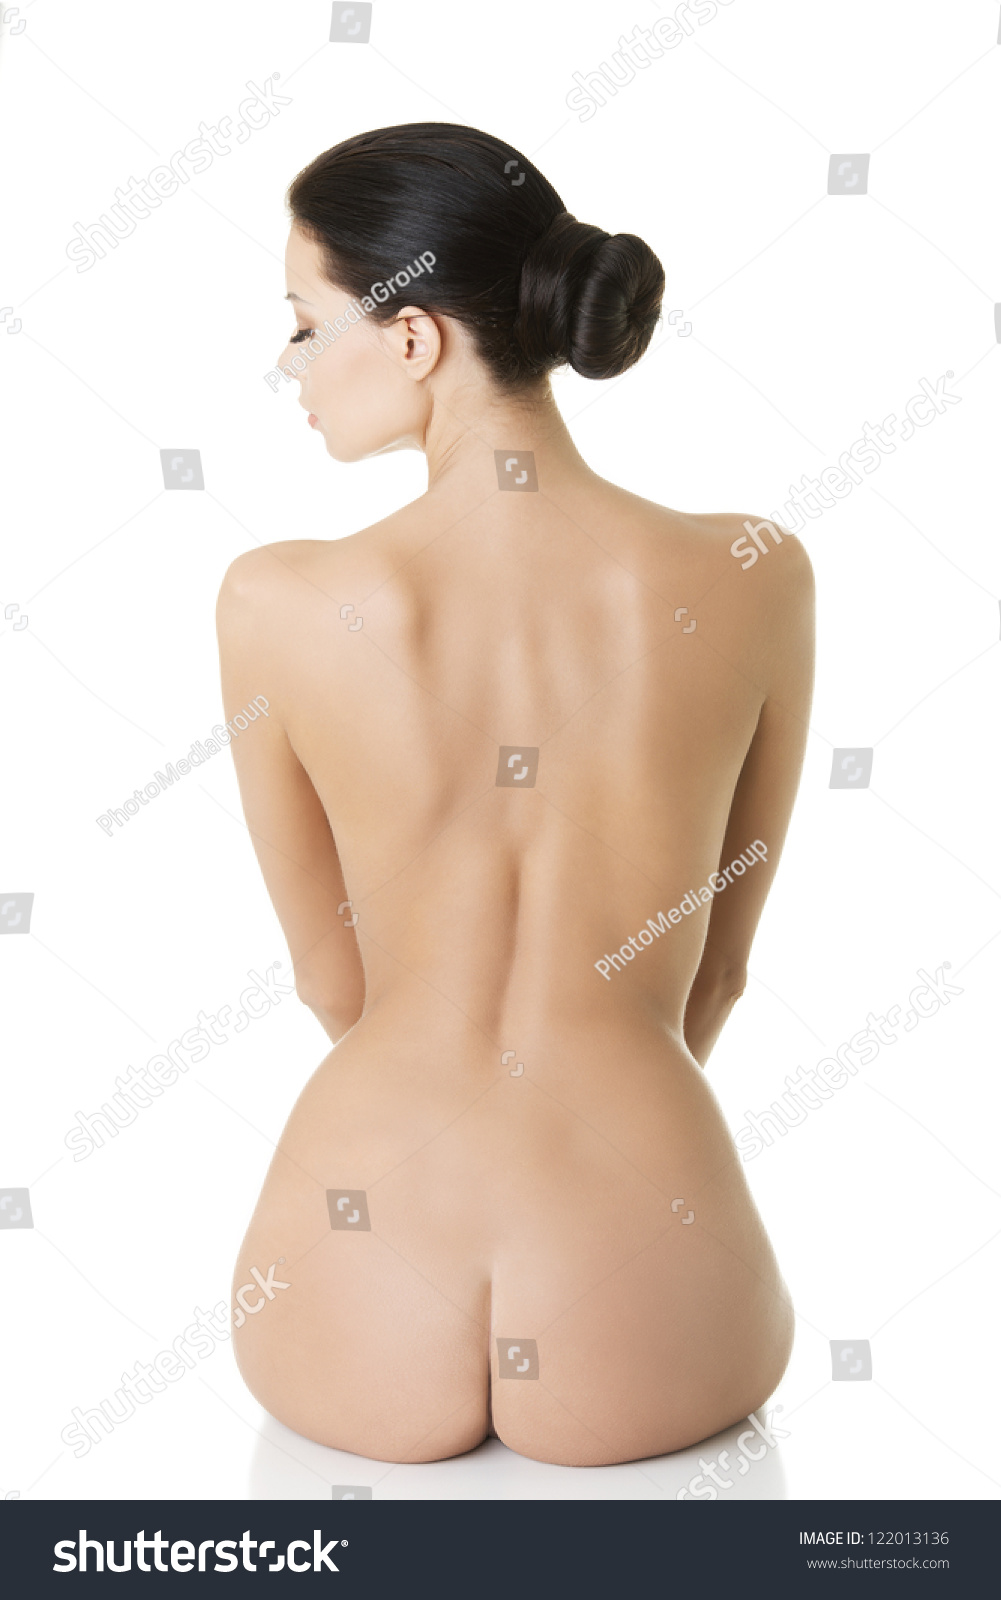 adi memic share from the back nude pose photos